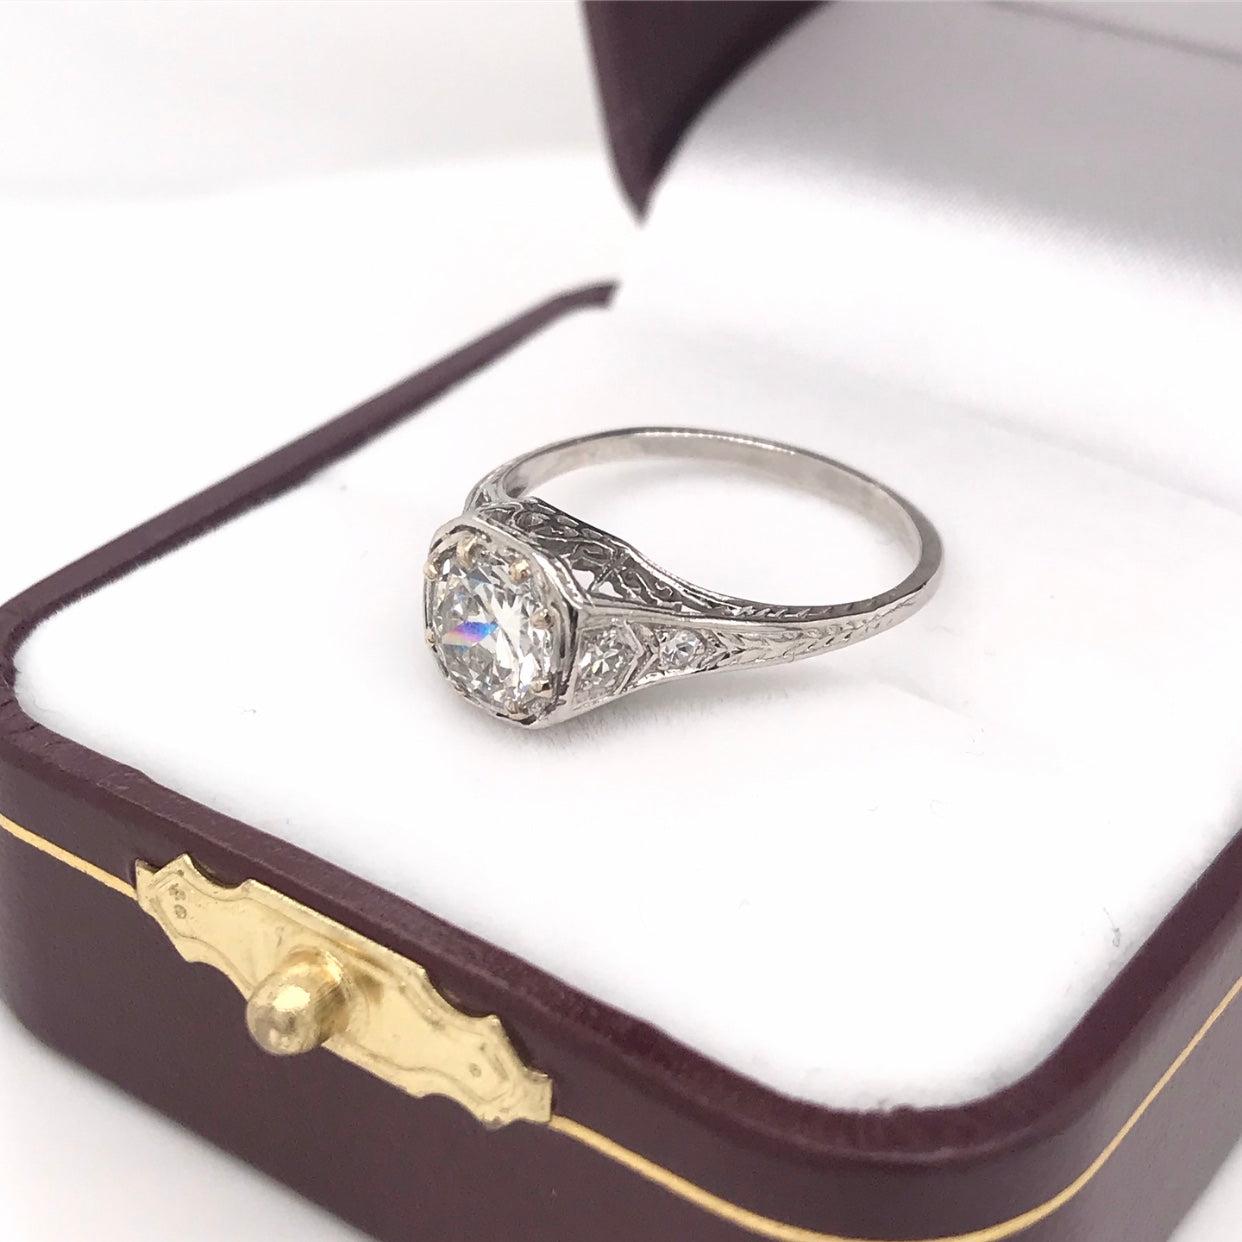 Edwardian 0.9 Carat Diamond Platinum Engagement Ring In Good Condition For Sale In Montgomery, AL